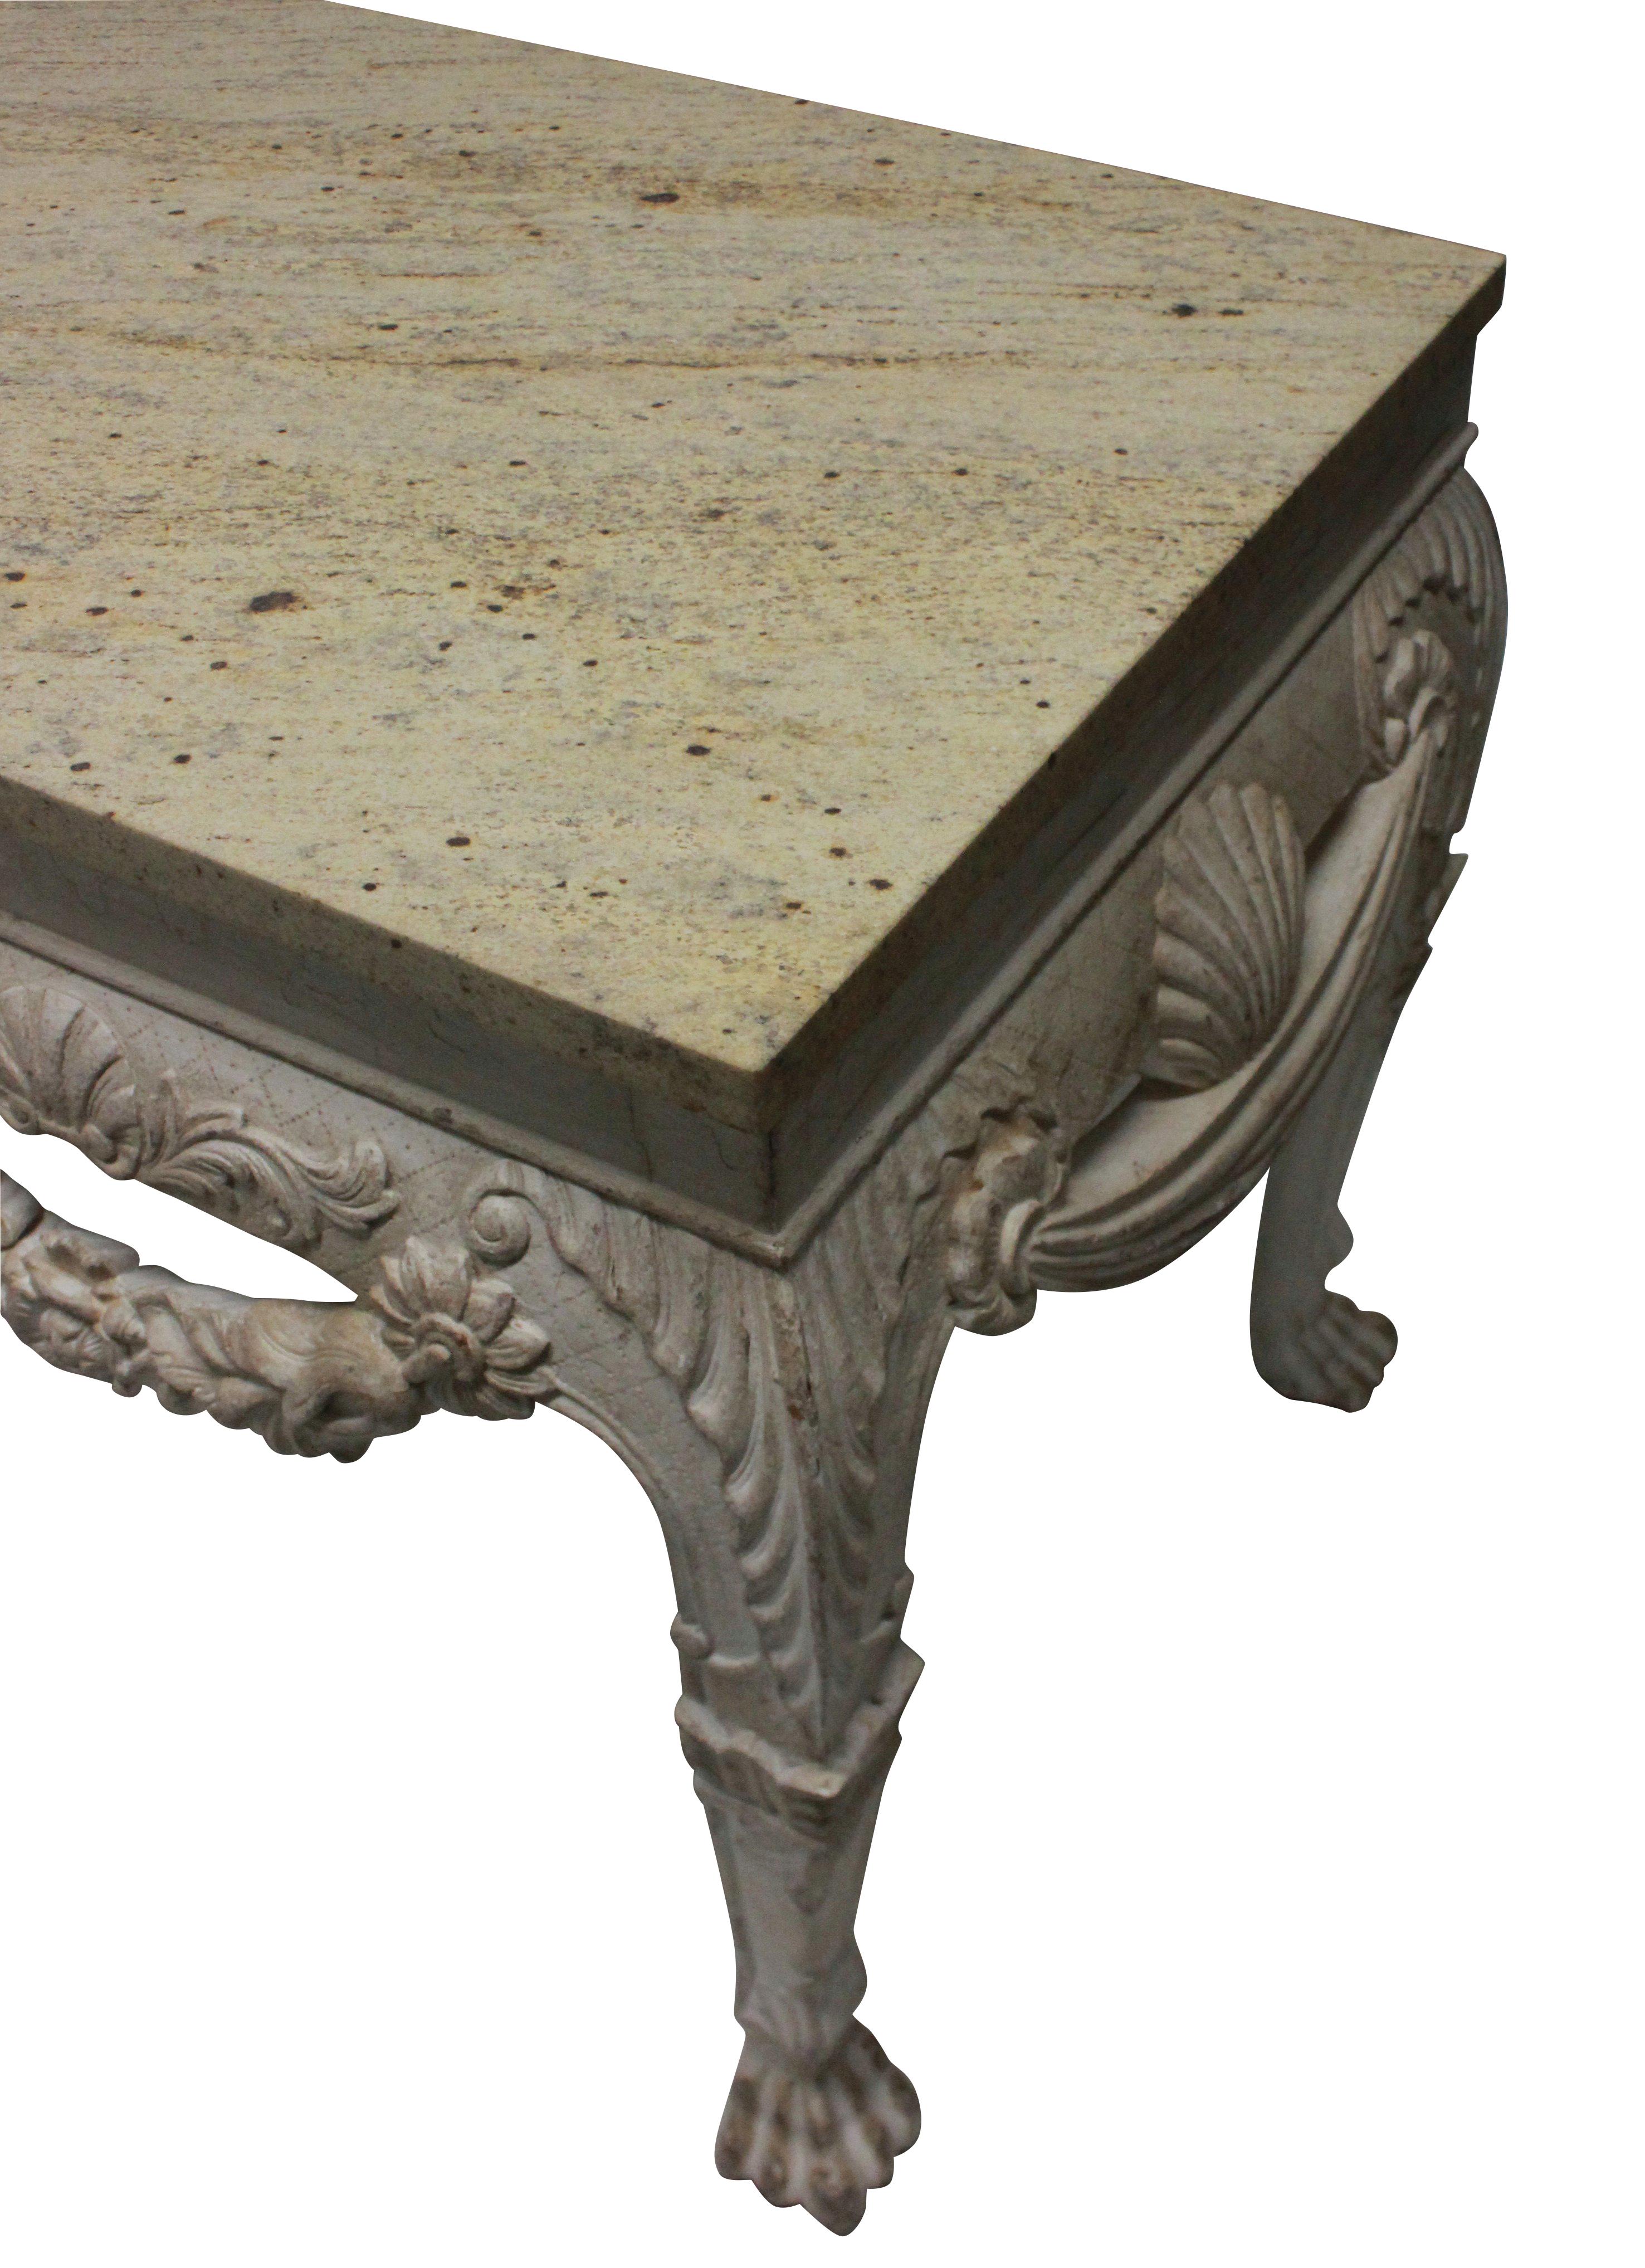 English Pair of Large Painted Mahogany and Marble-Top Console Tables